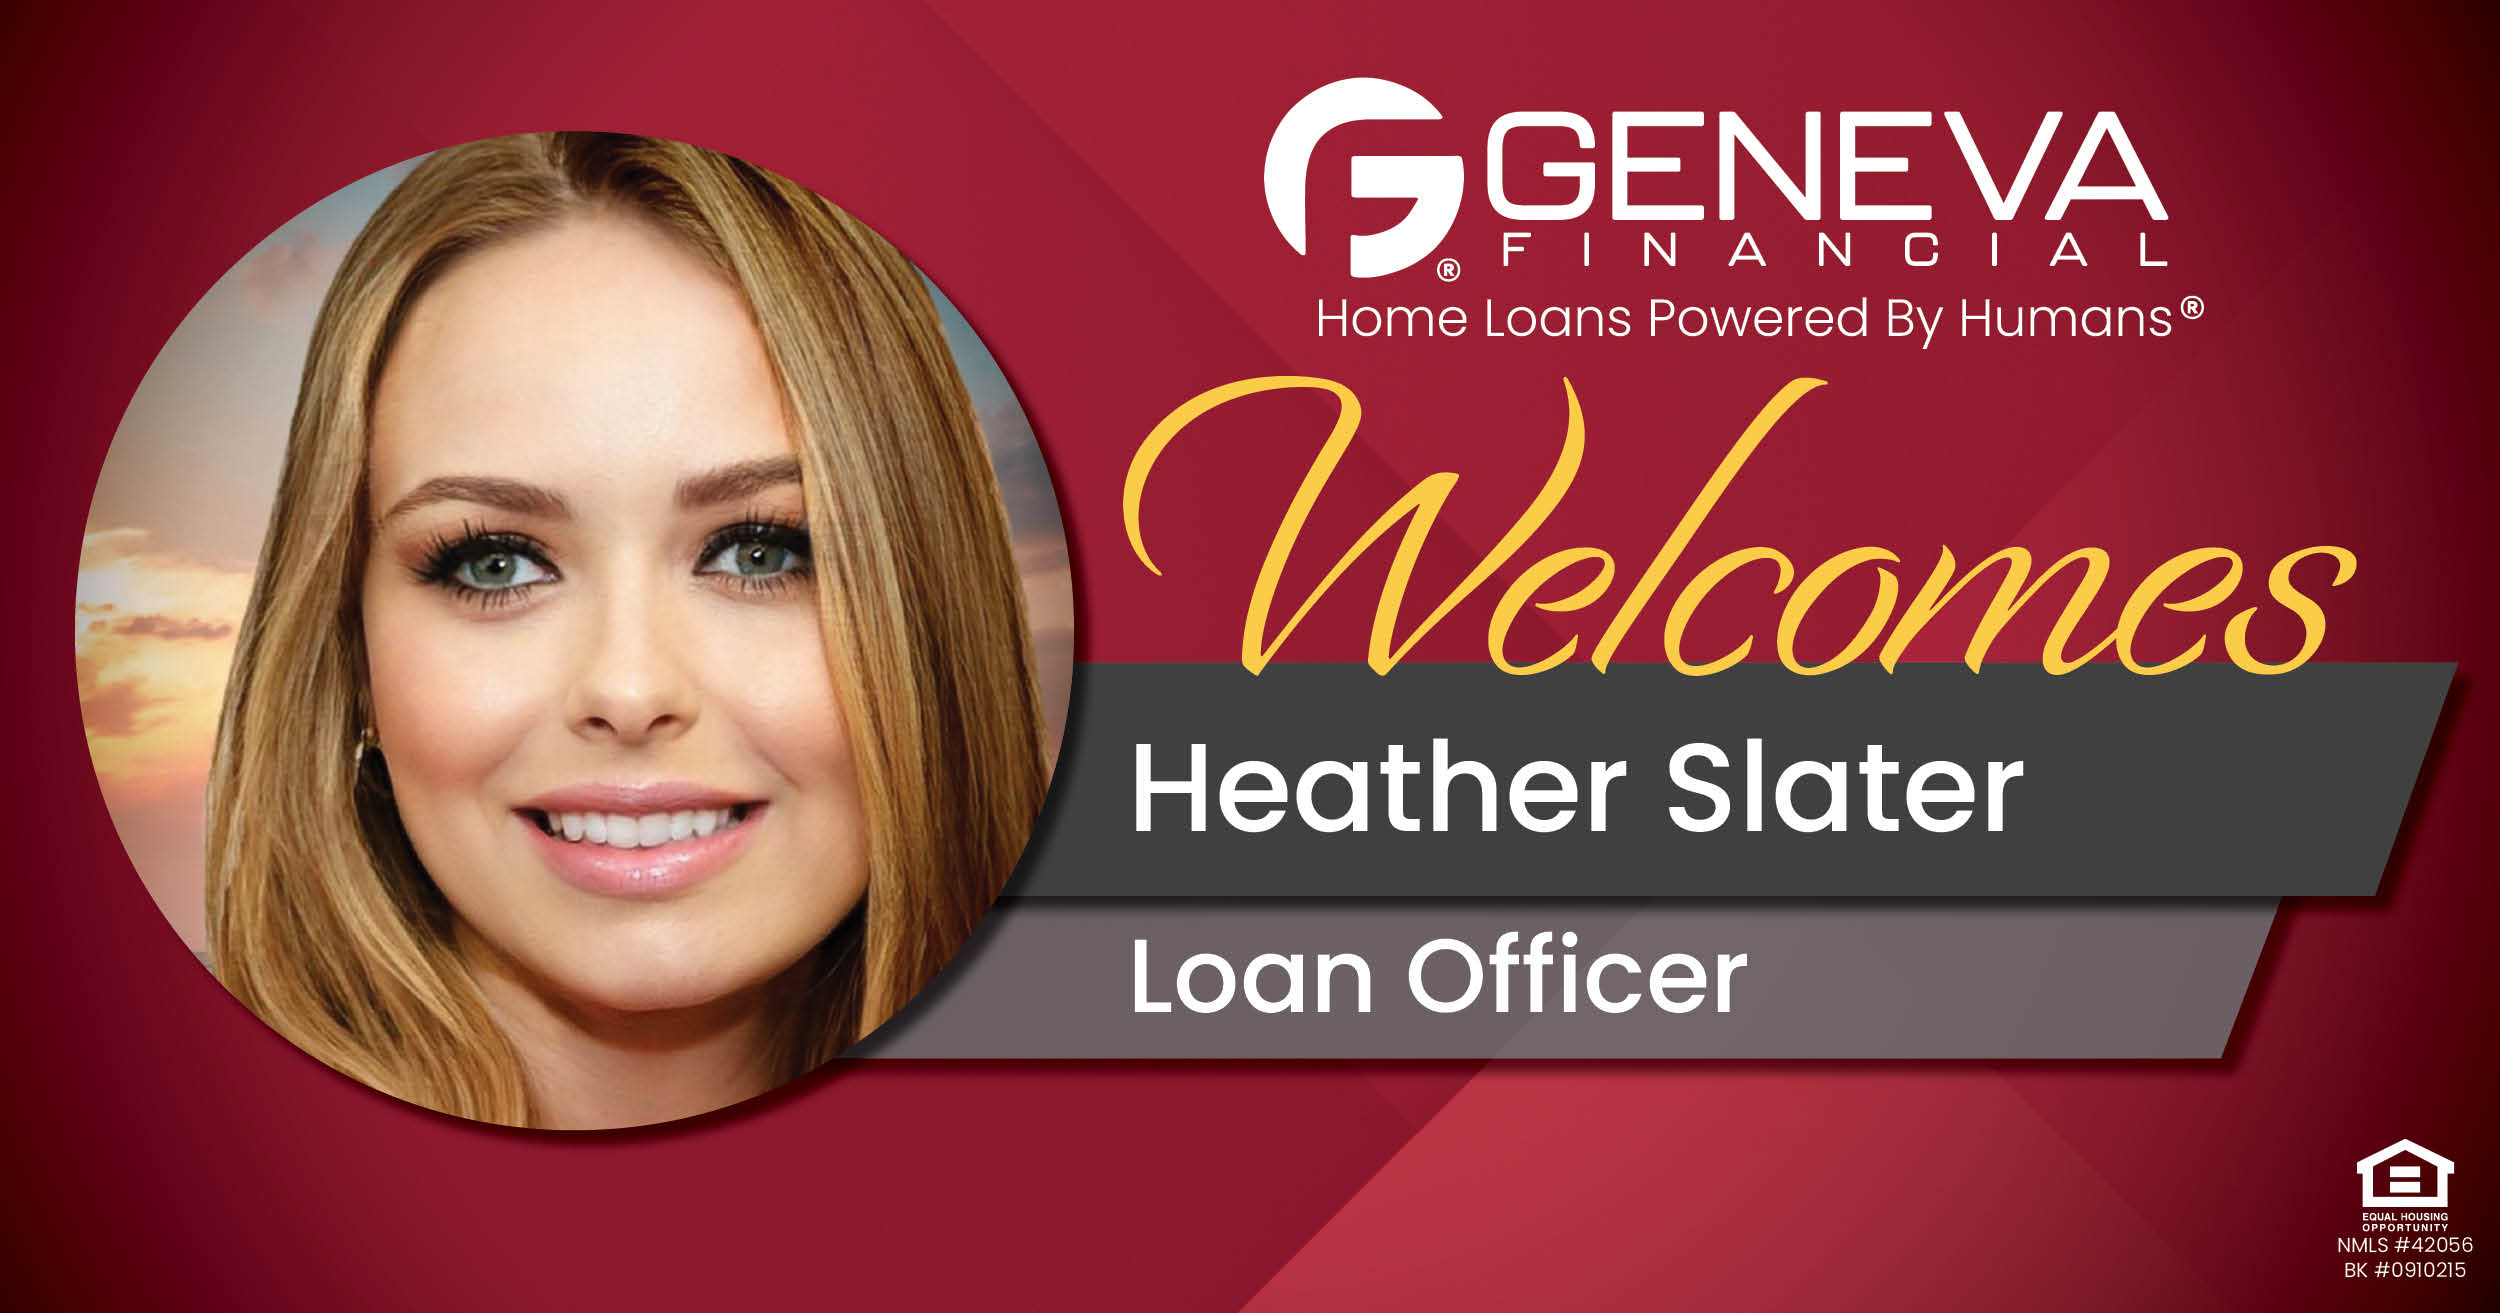 Geneva Financial Welcomes New Loan Officer Heather Slater to New Port Richey, FL – Home Loans Powered by Humans®.